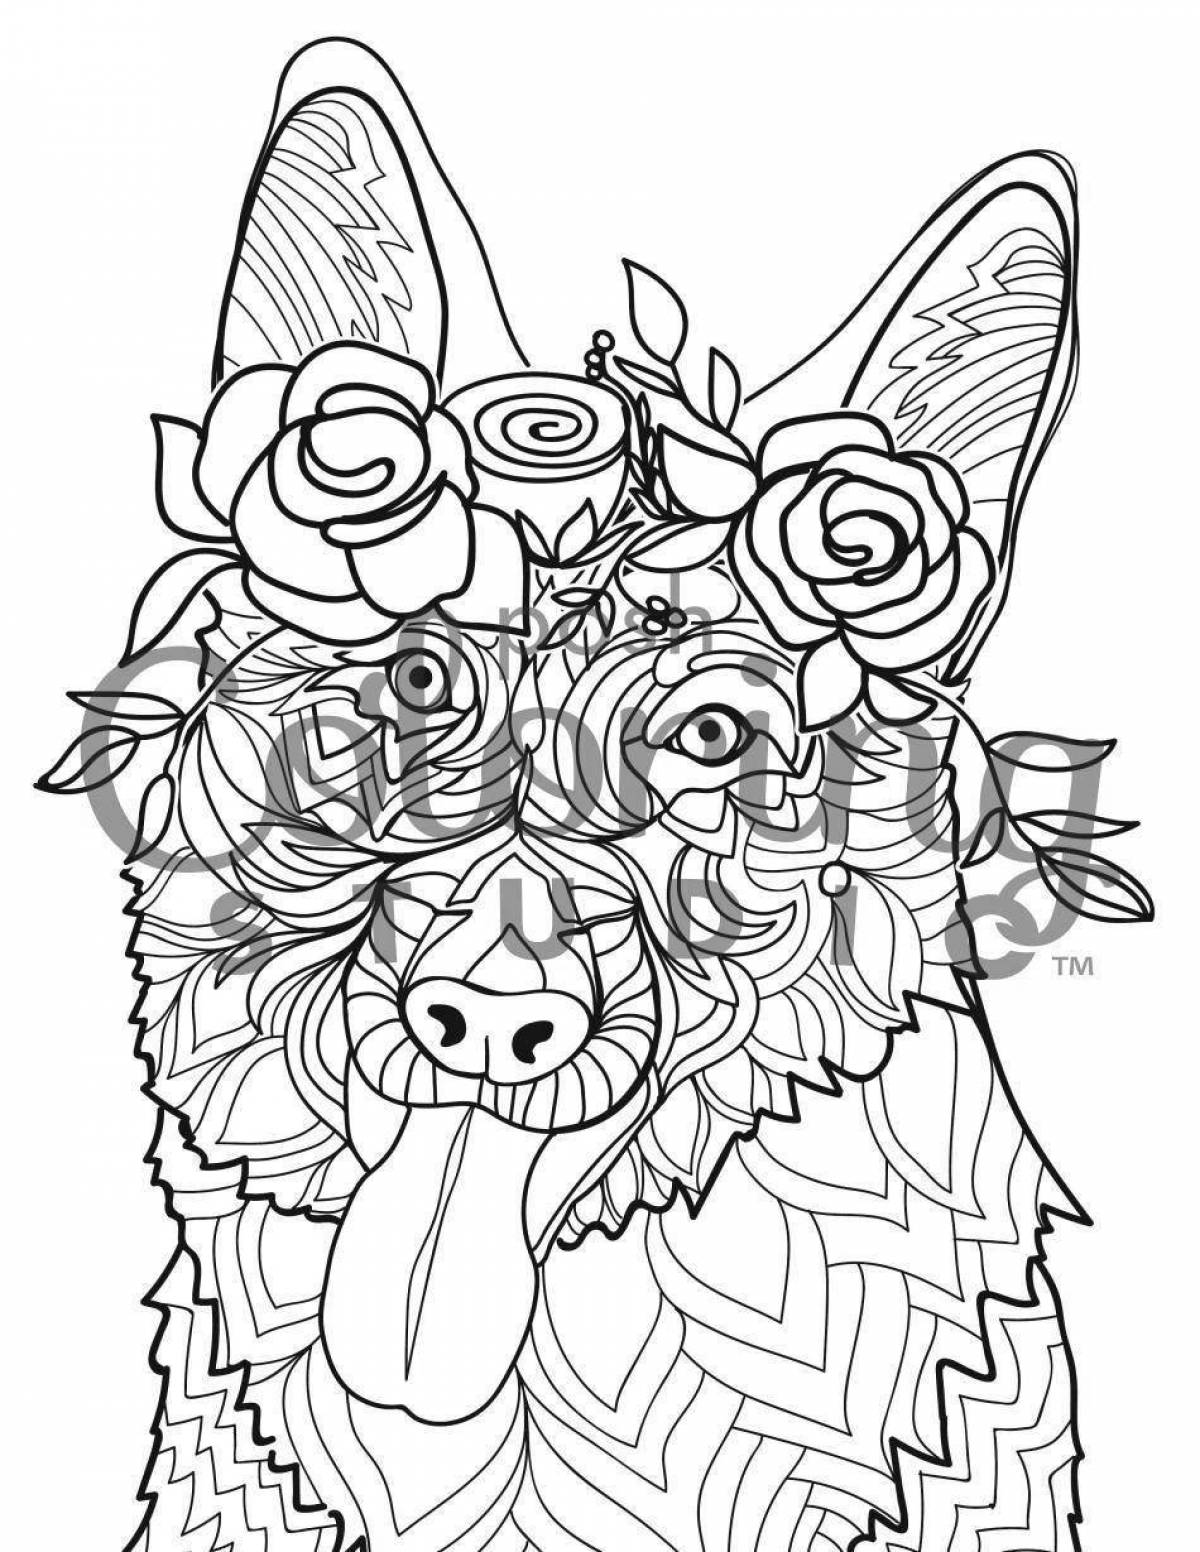 Colouring energetic dog antistress